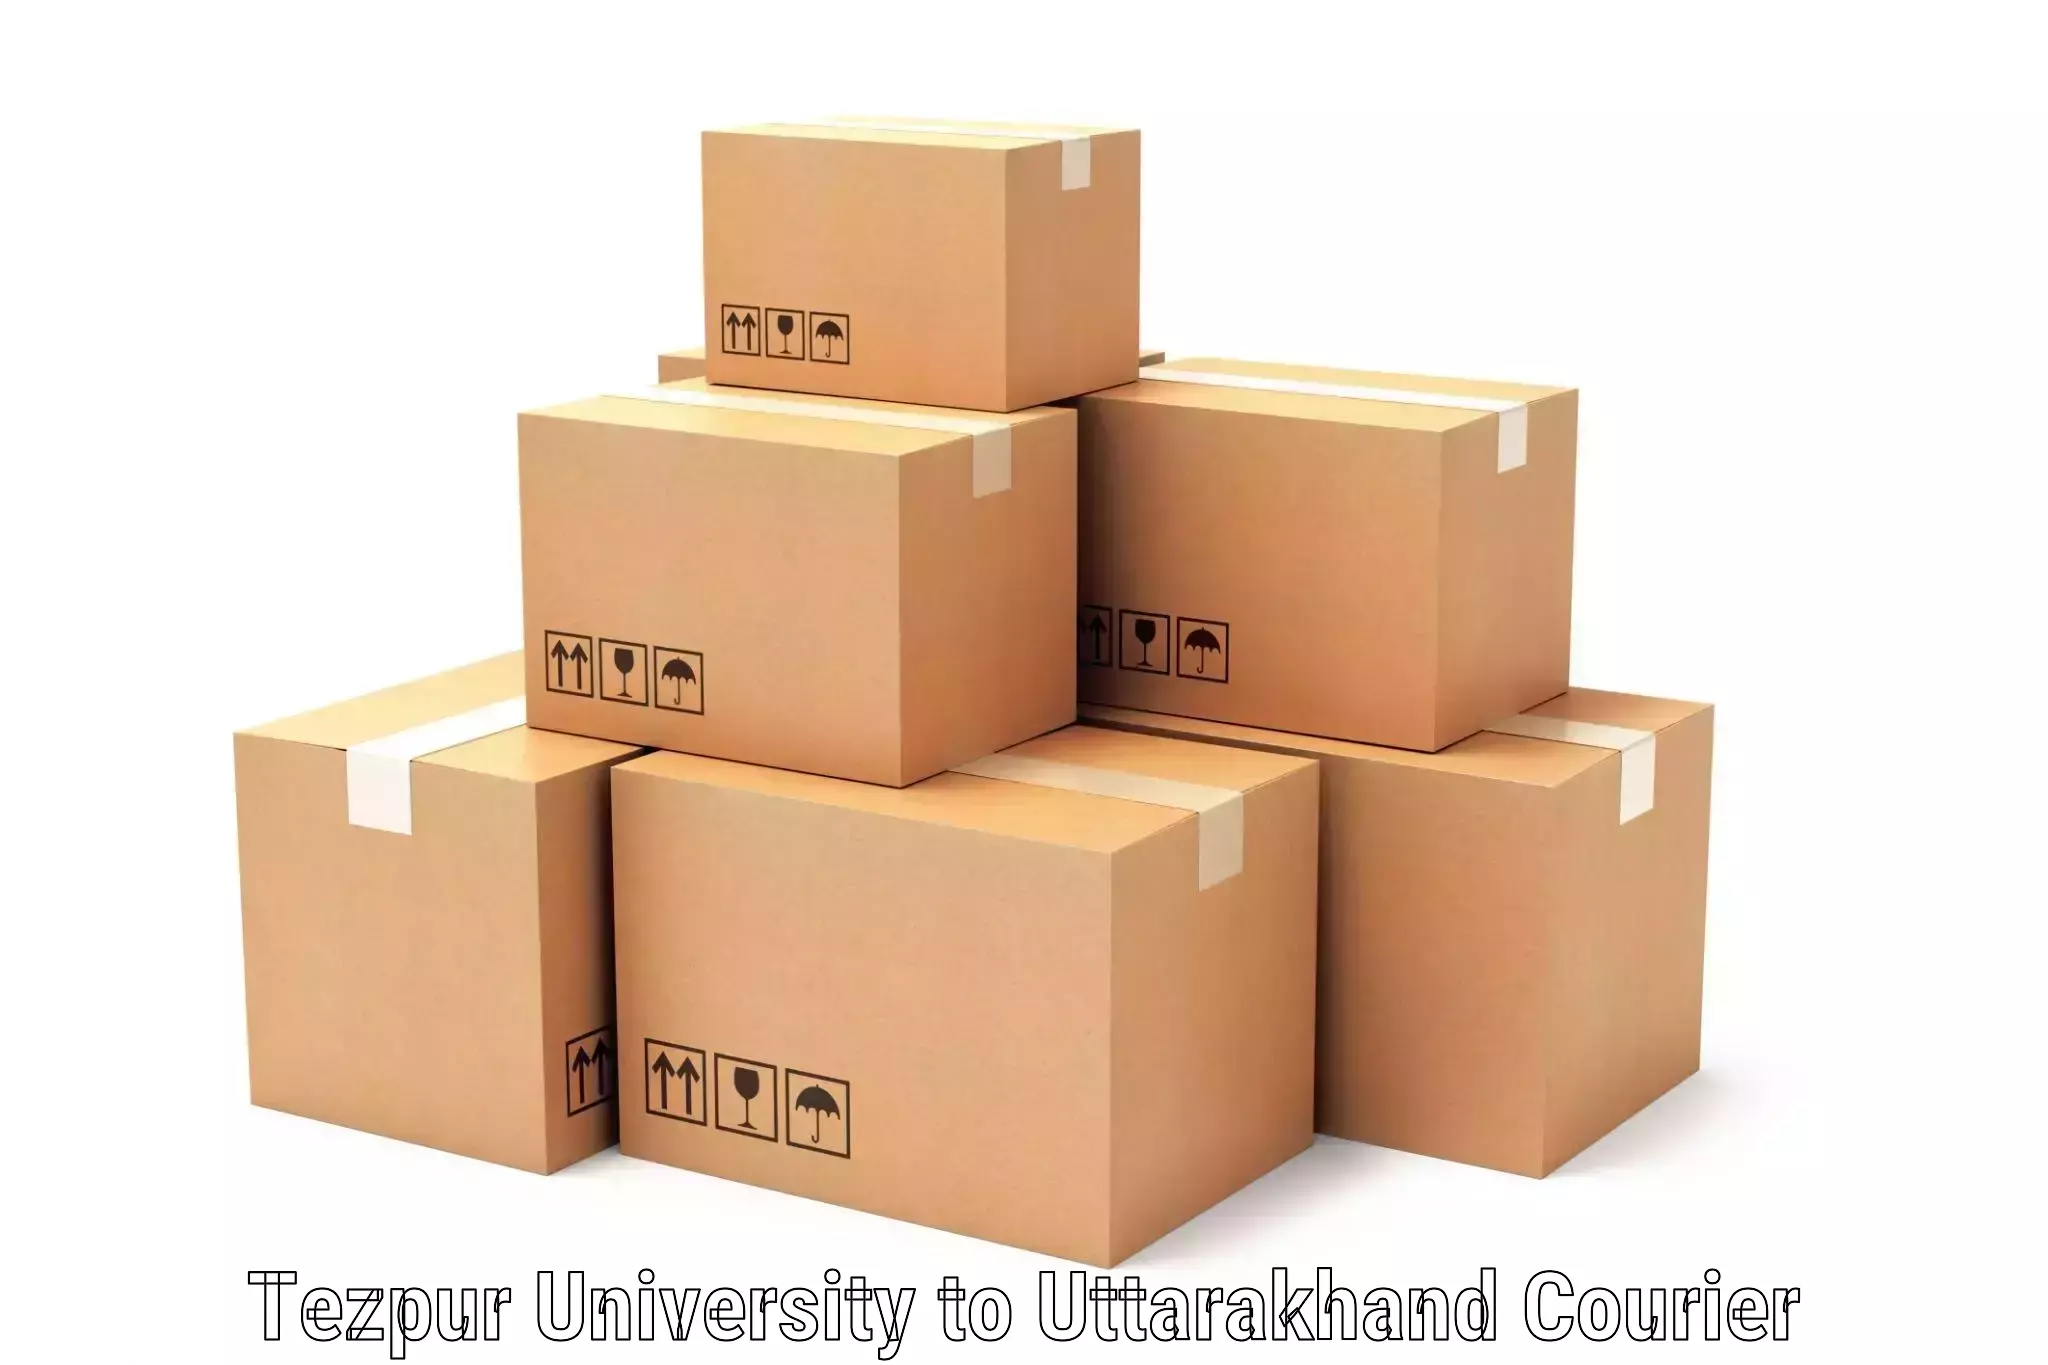 Dynamic courier operations Tezpur University to Roorkee